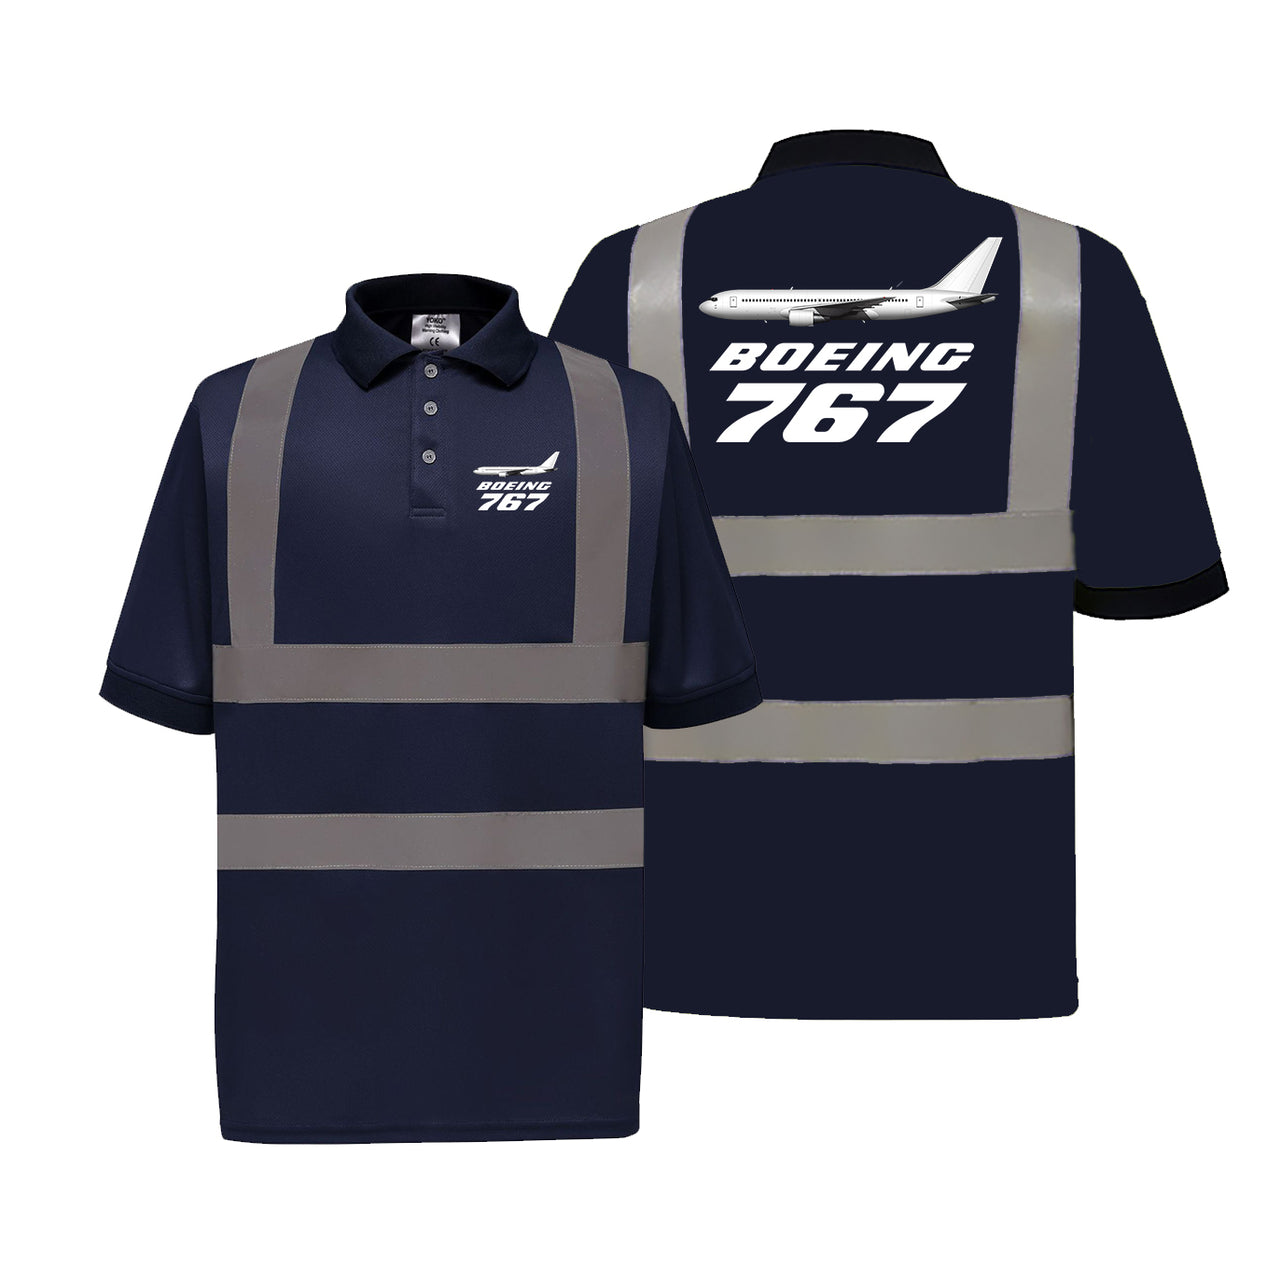 The Boeing 767 Designed Reflective Polo T-Shirts